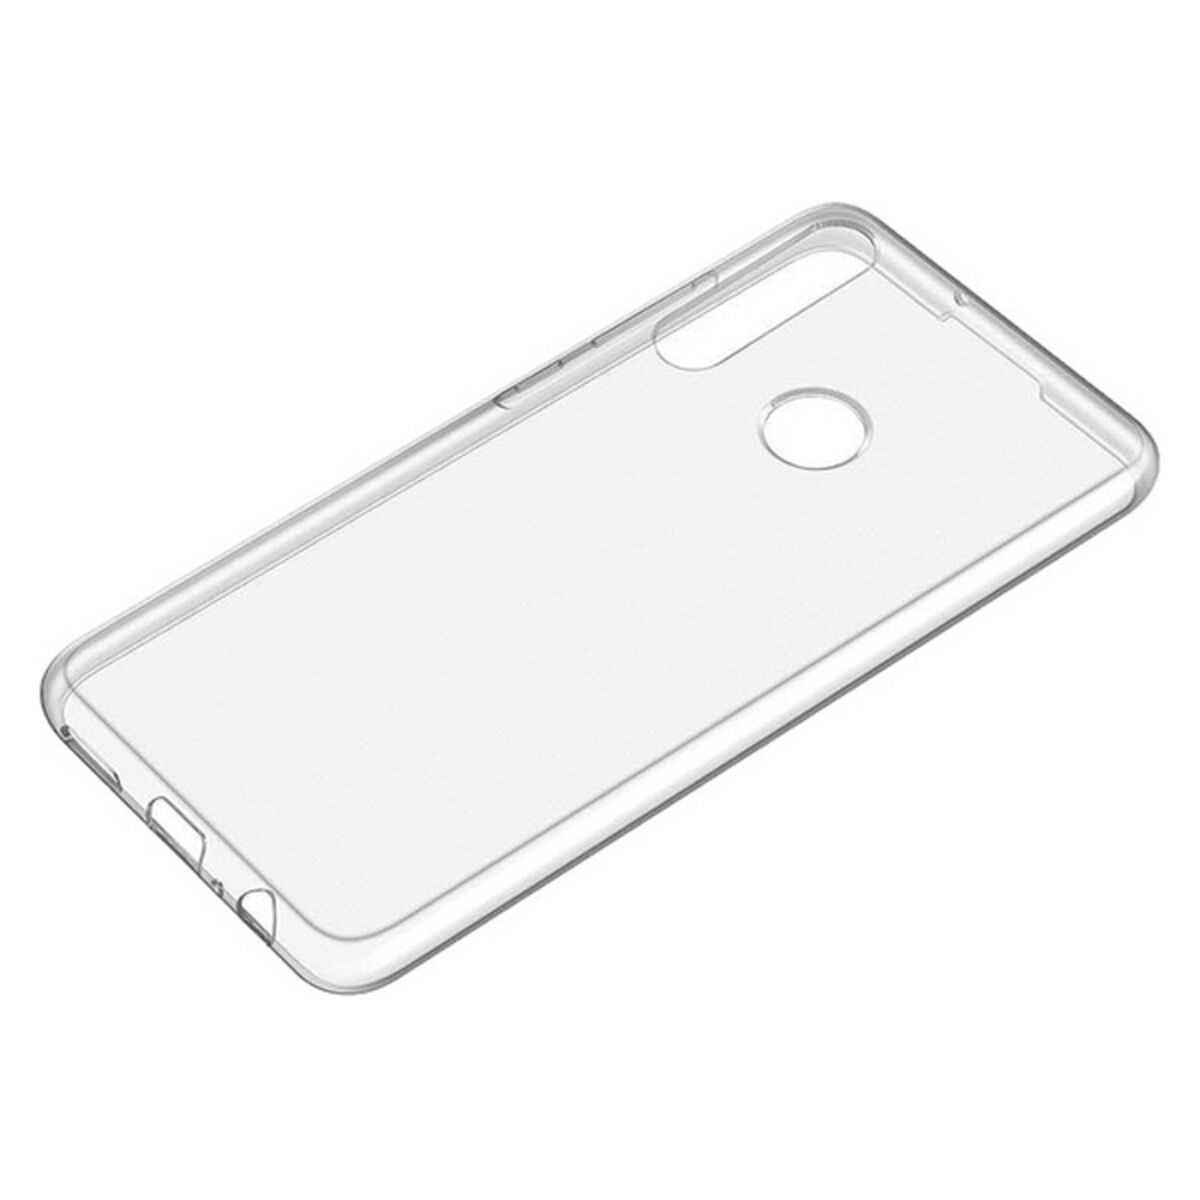 Mobile cover Huawei Y6P Transparent Polycarbonate - Generation Gamer